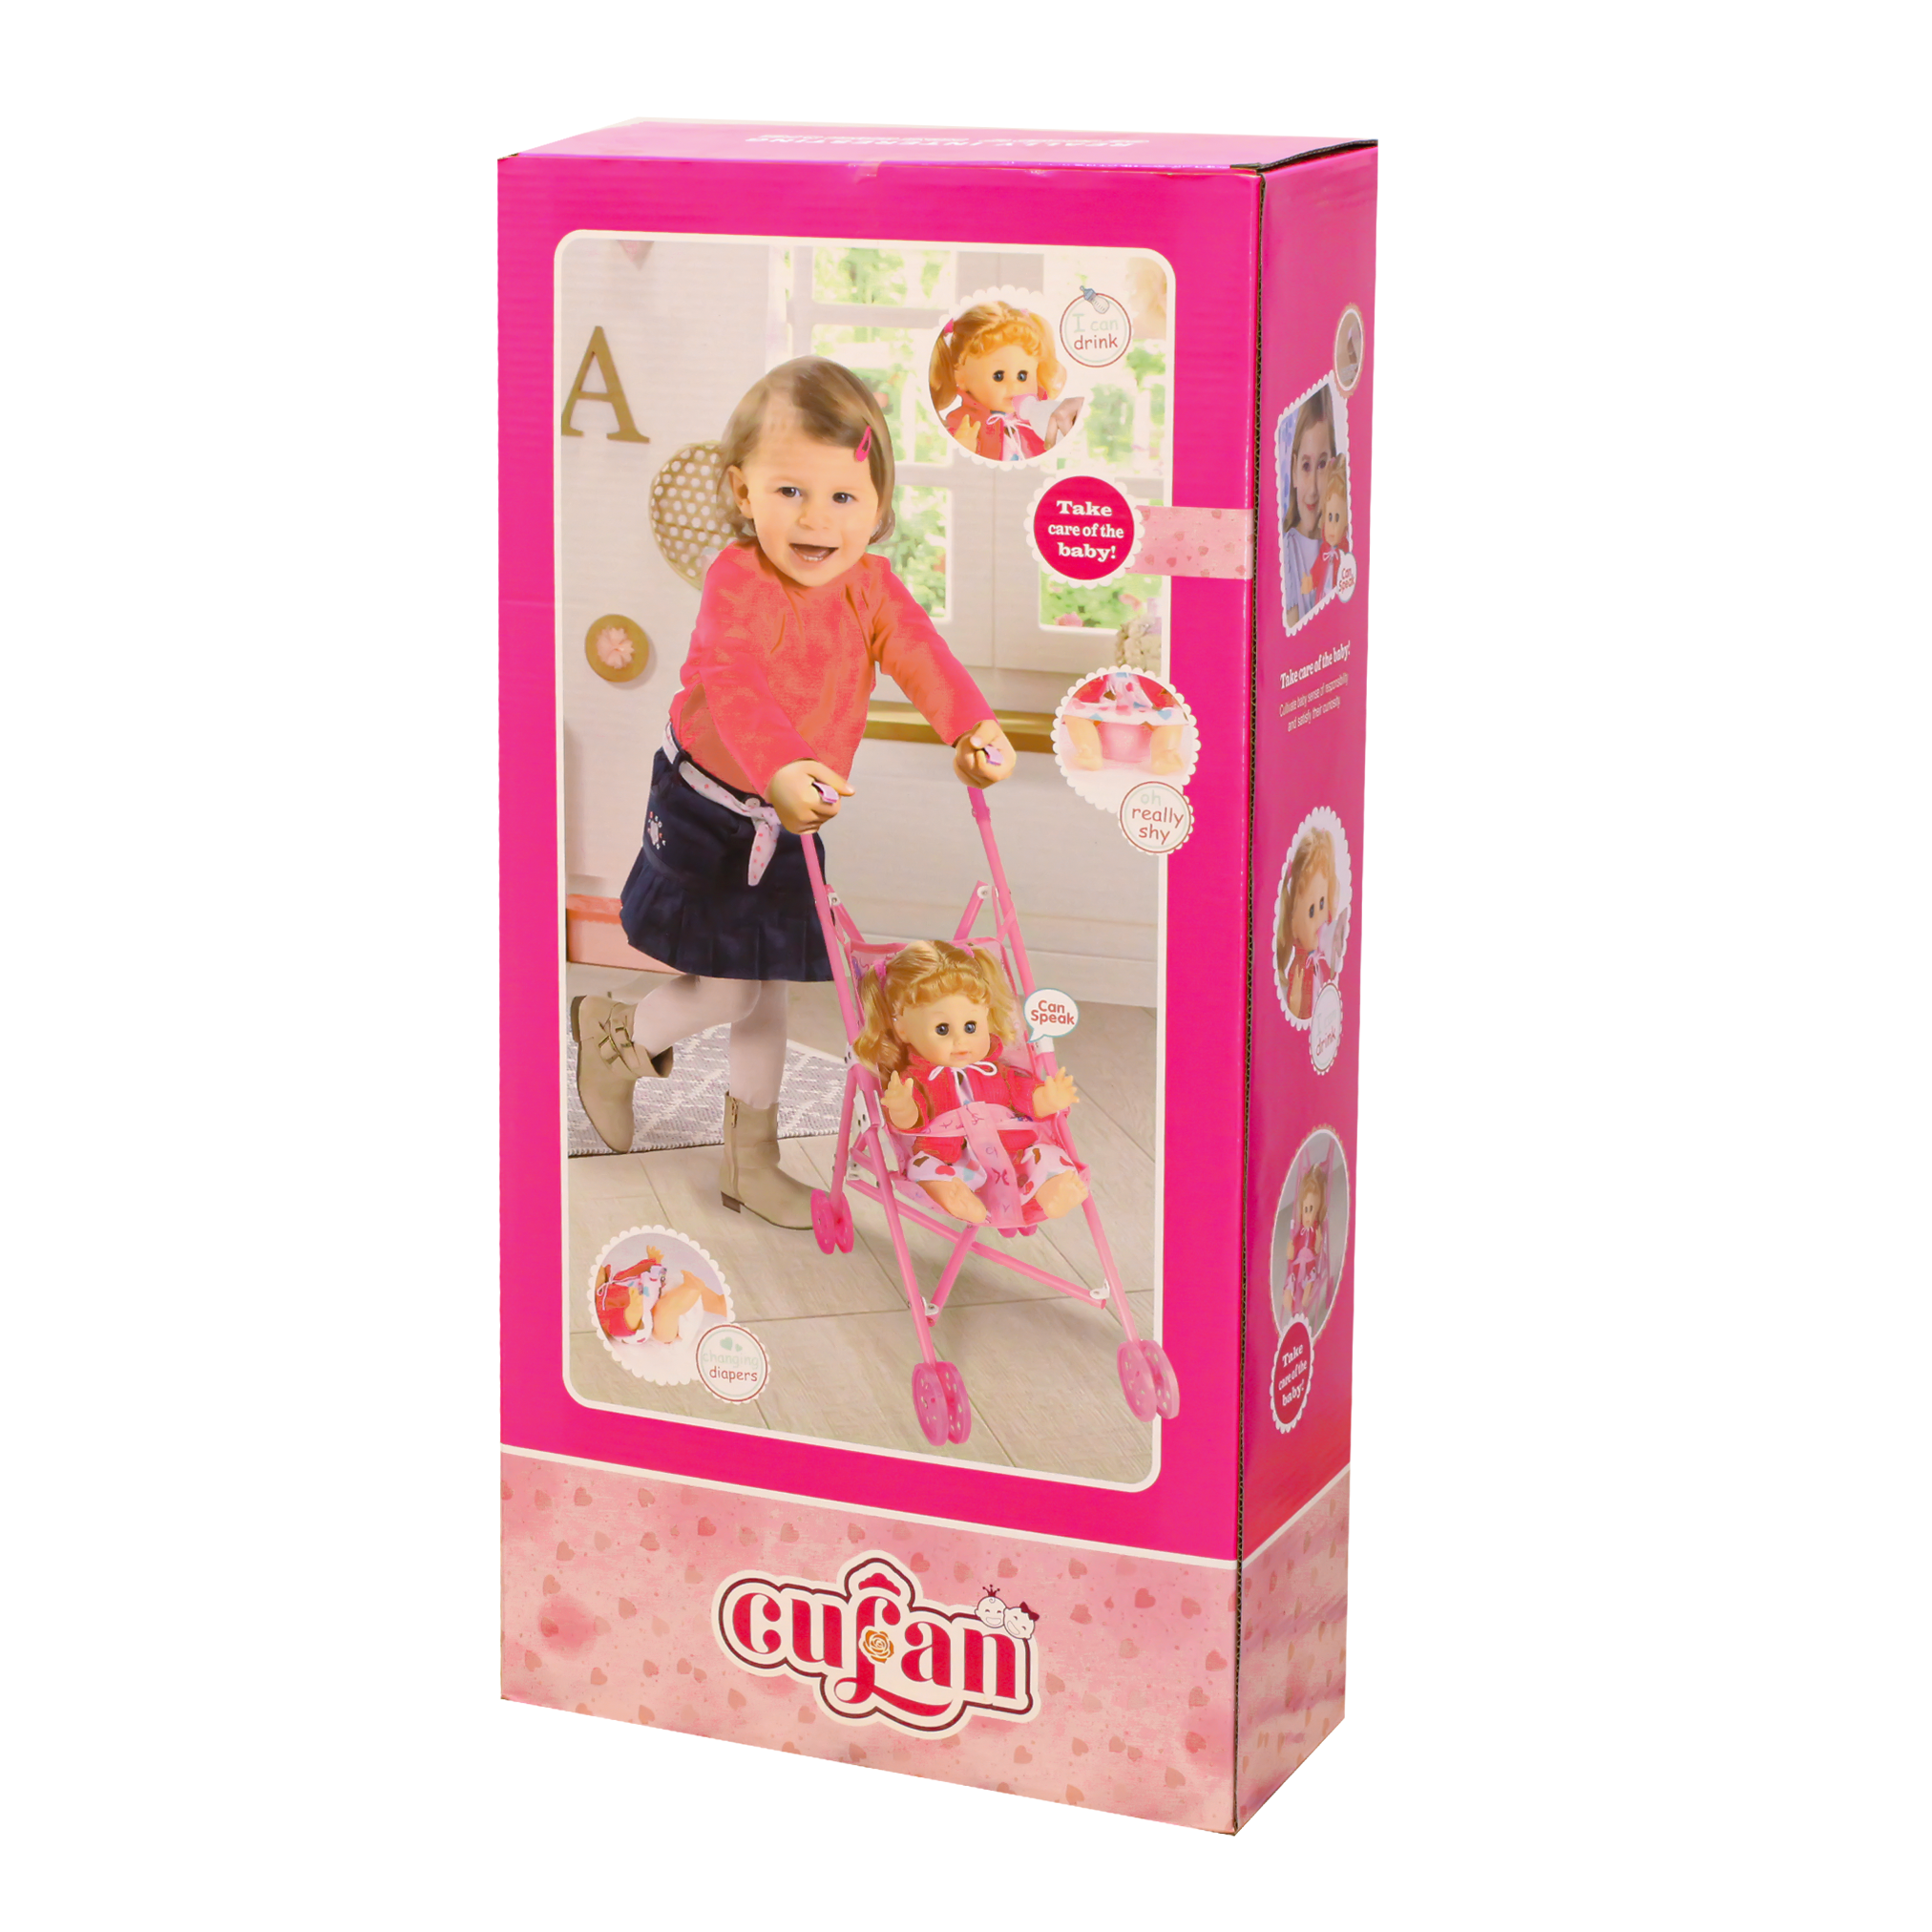 Cufan sweet baby doll with accessories